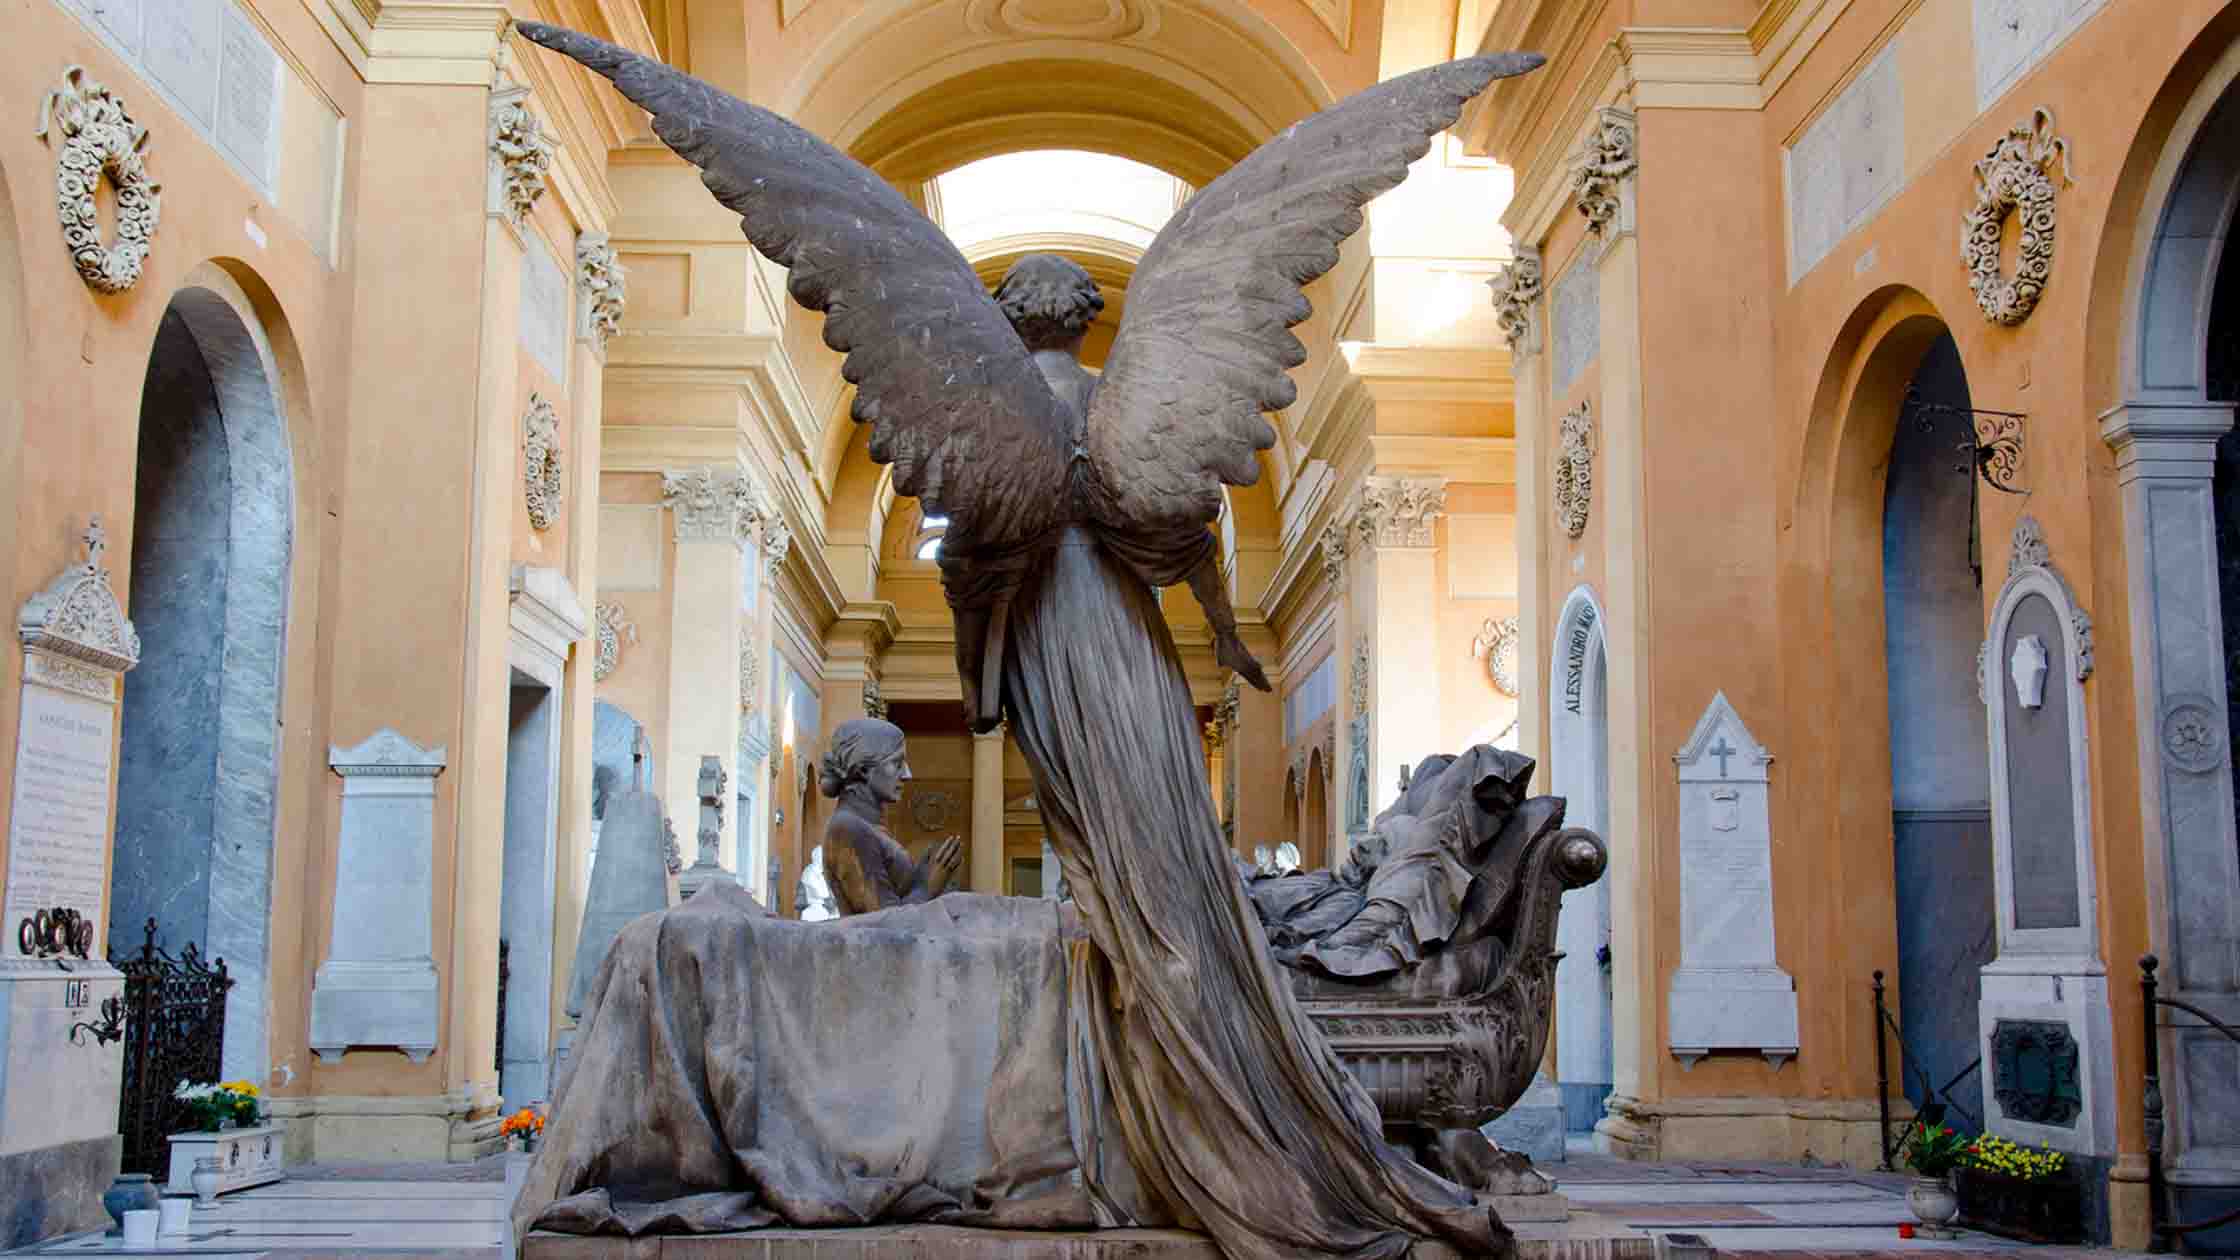 A winged angel statue in a church.